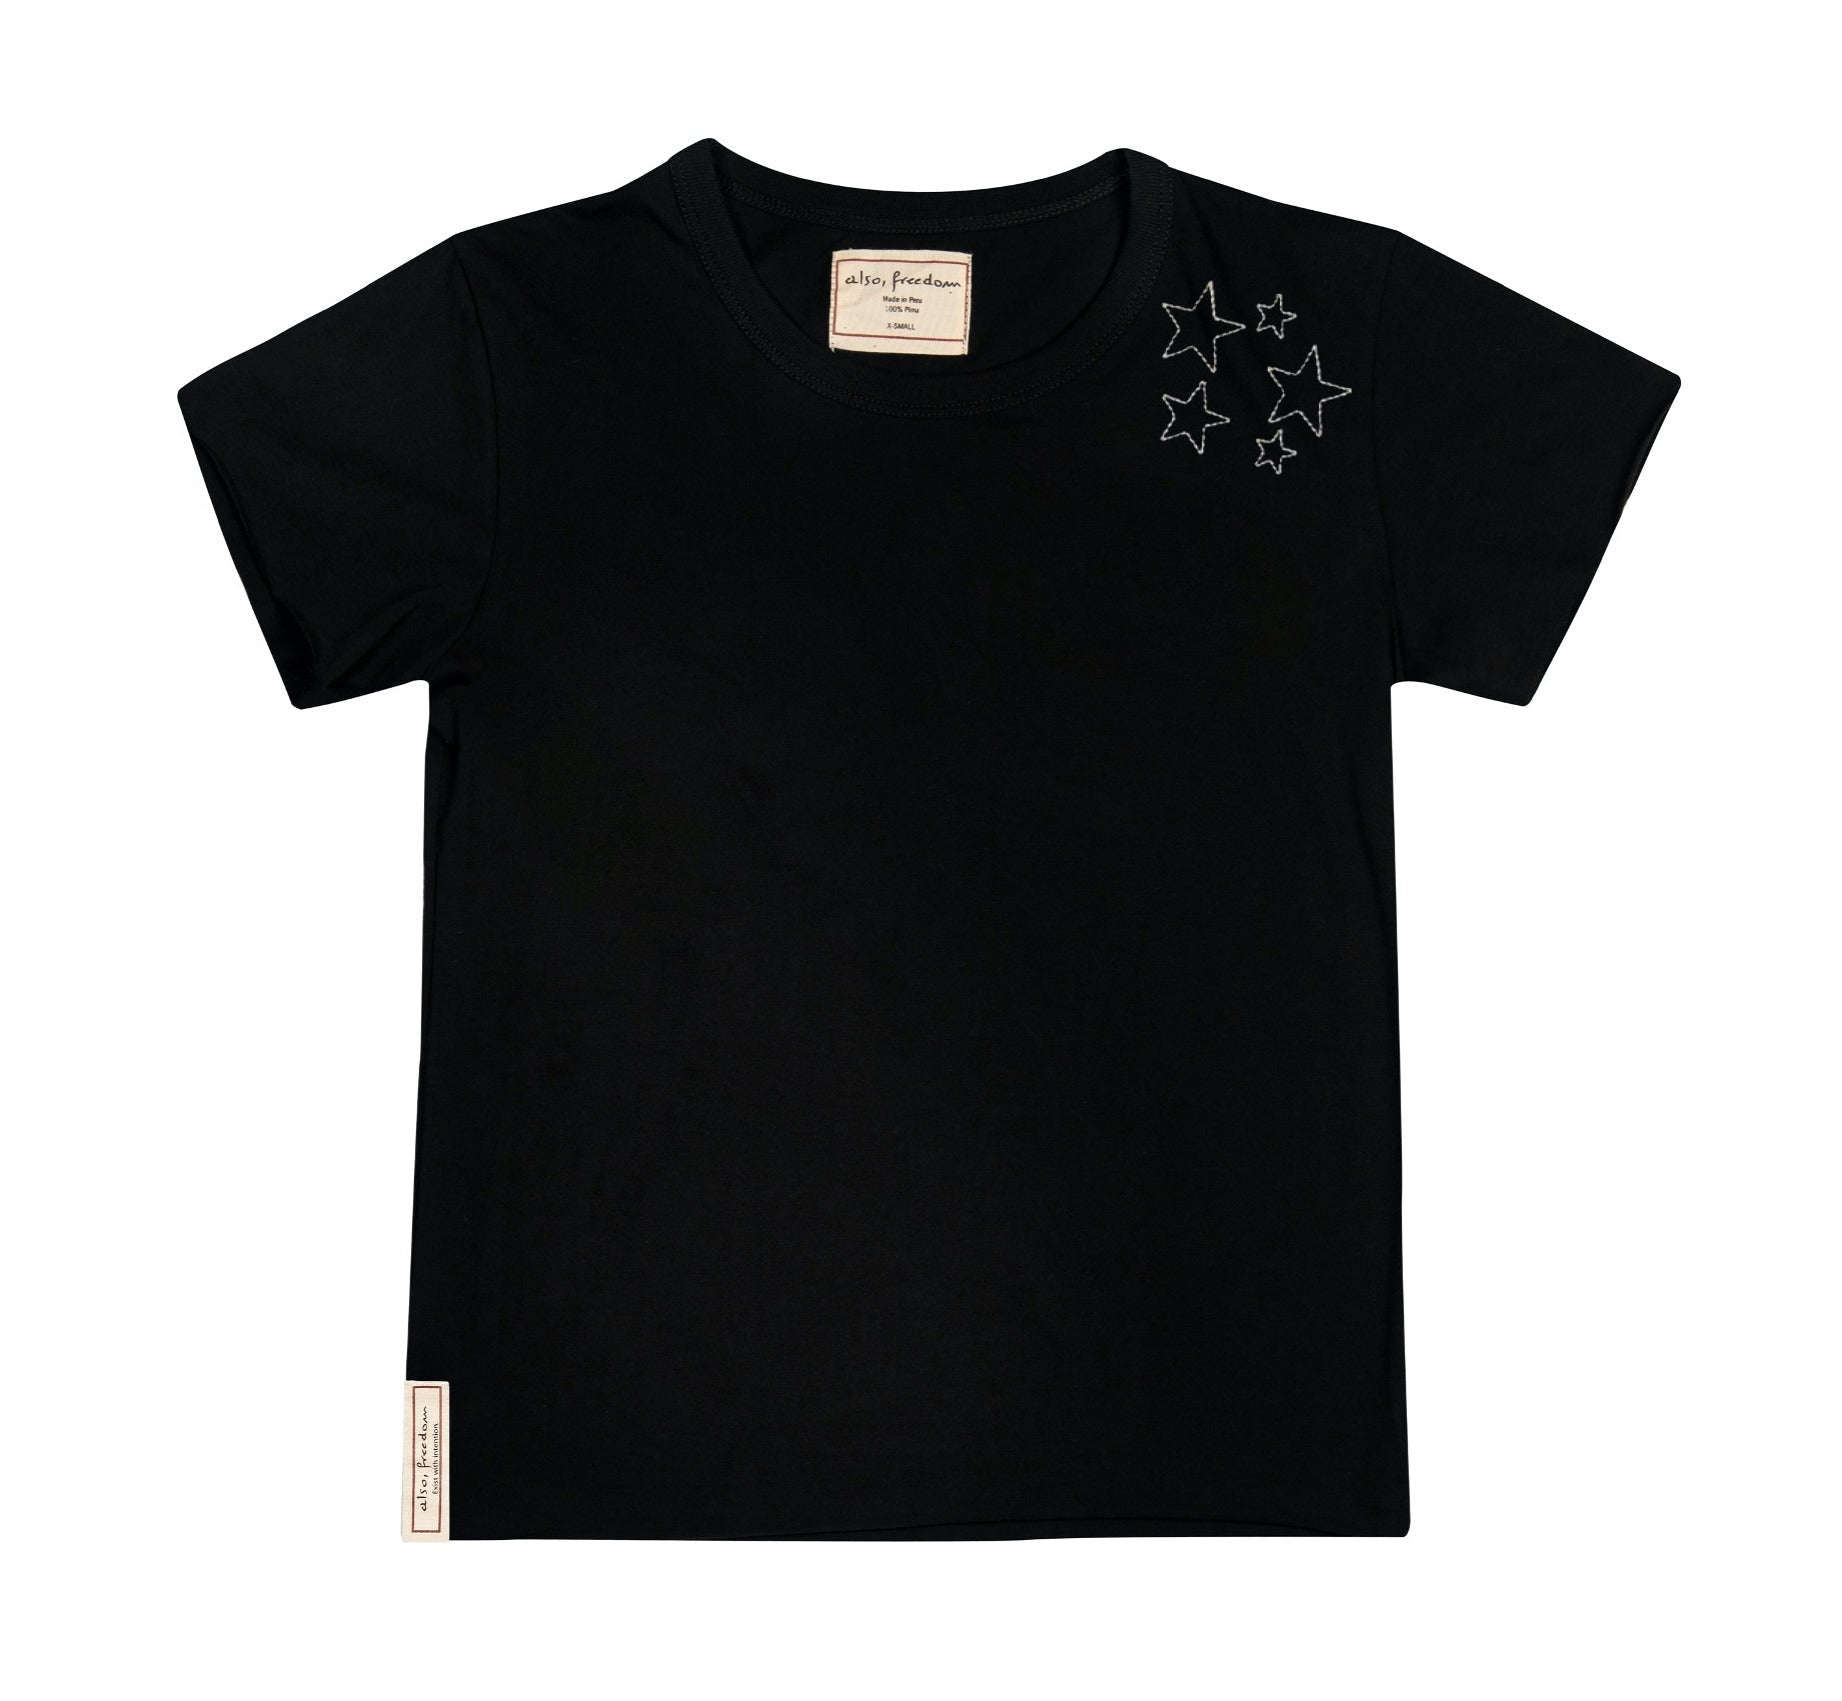 Sprinkle of Courage, Baby Girl Tee BLACK - Also, Freedom